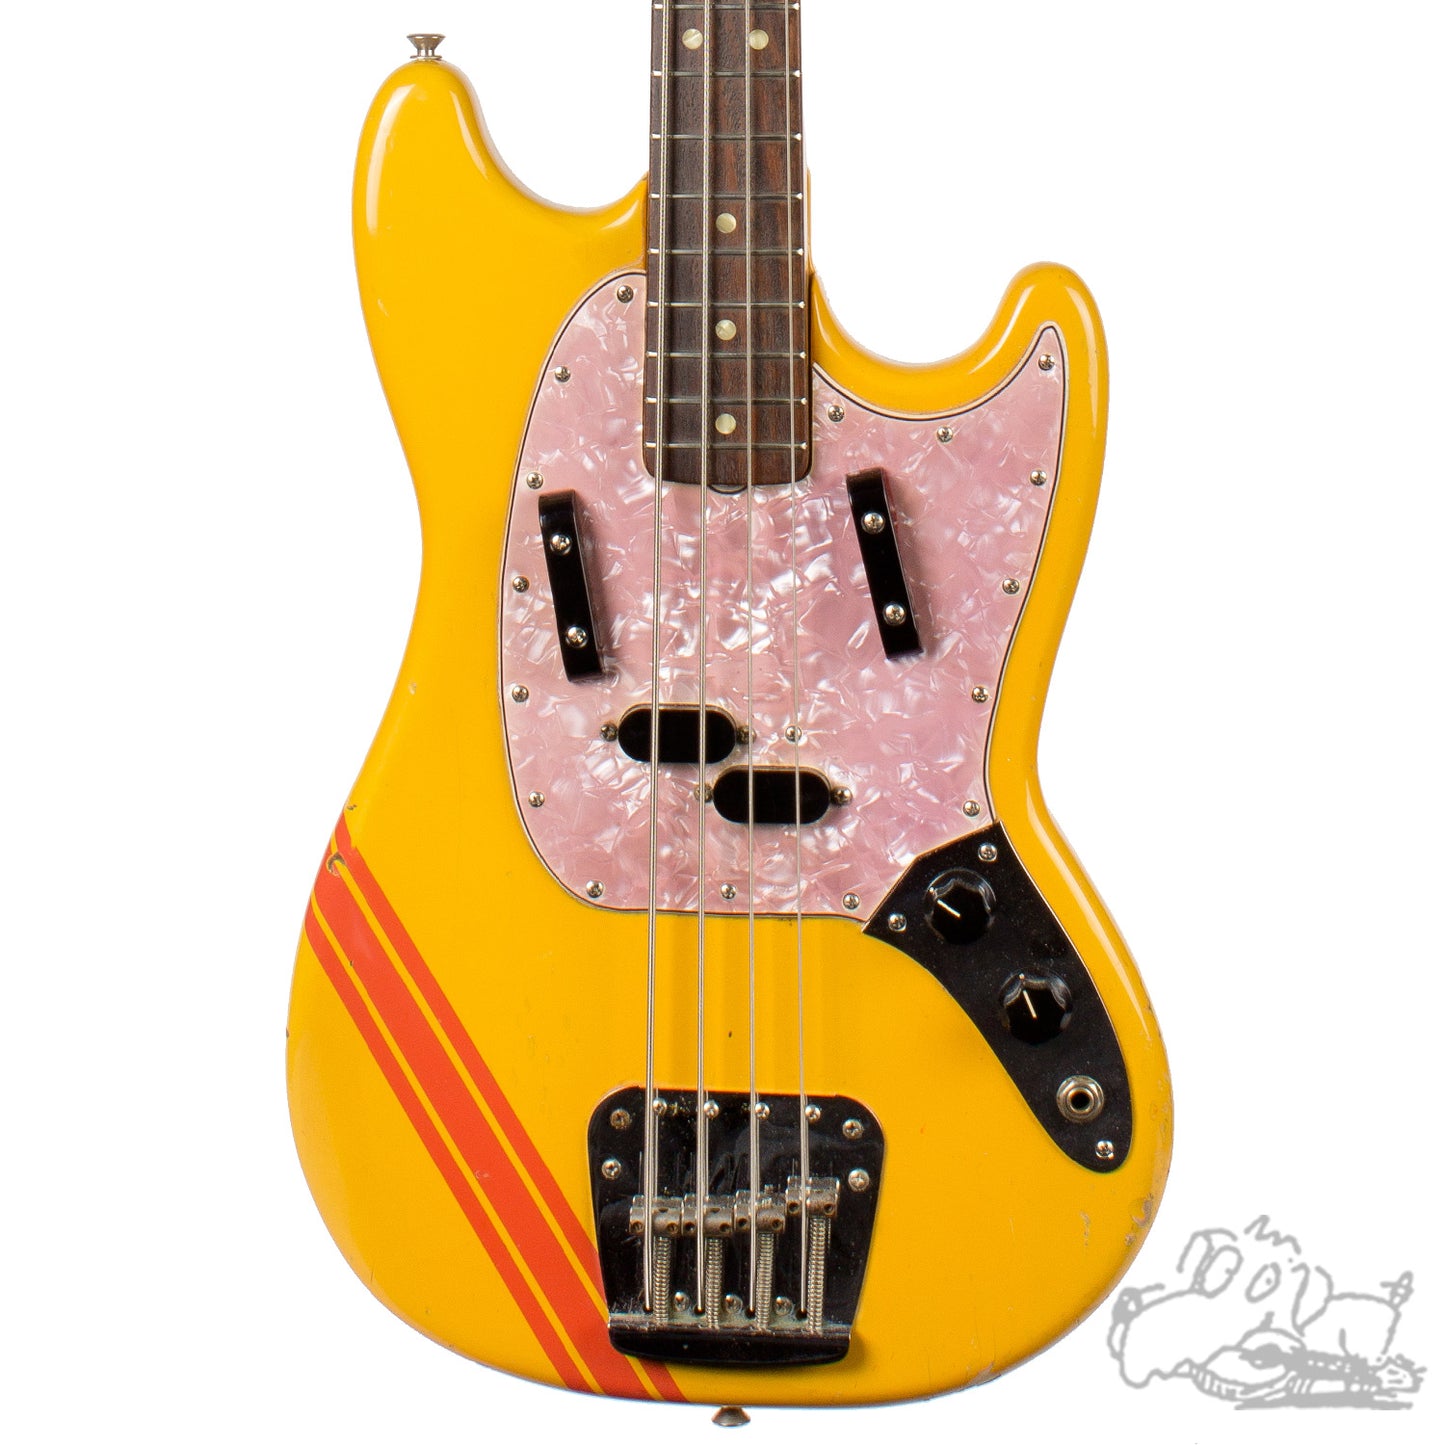 1971 Fender Competition Orange Mustang Bass w/ Rose Pickguard